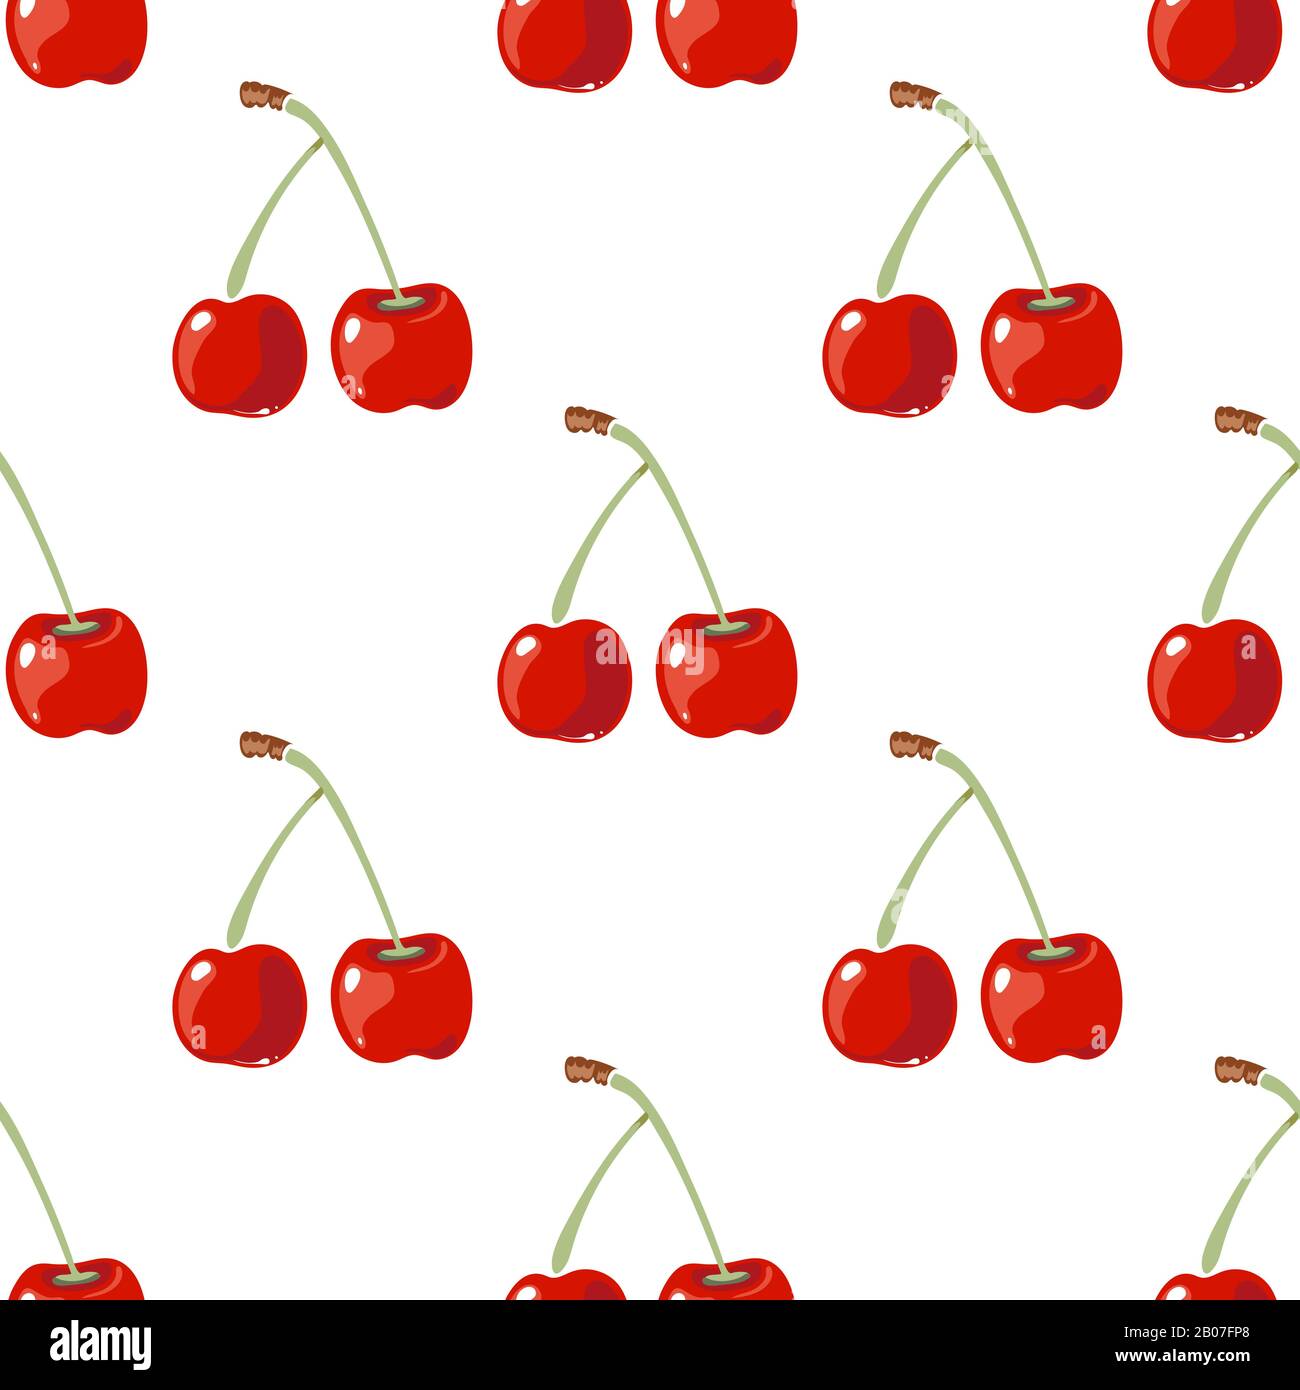 Red cherry vector seamless background. Wallpaper with fresh fruit illustration Stock Vector